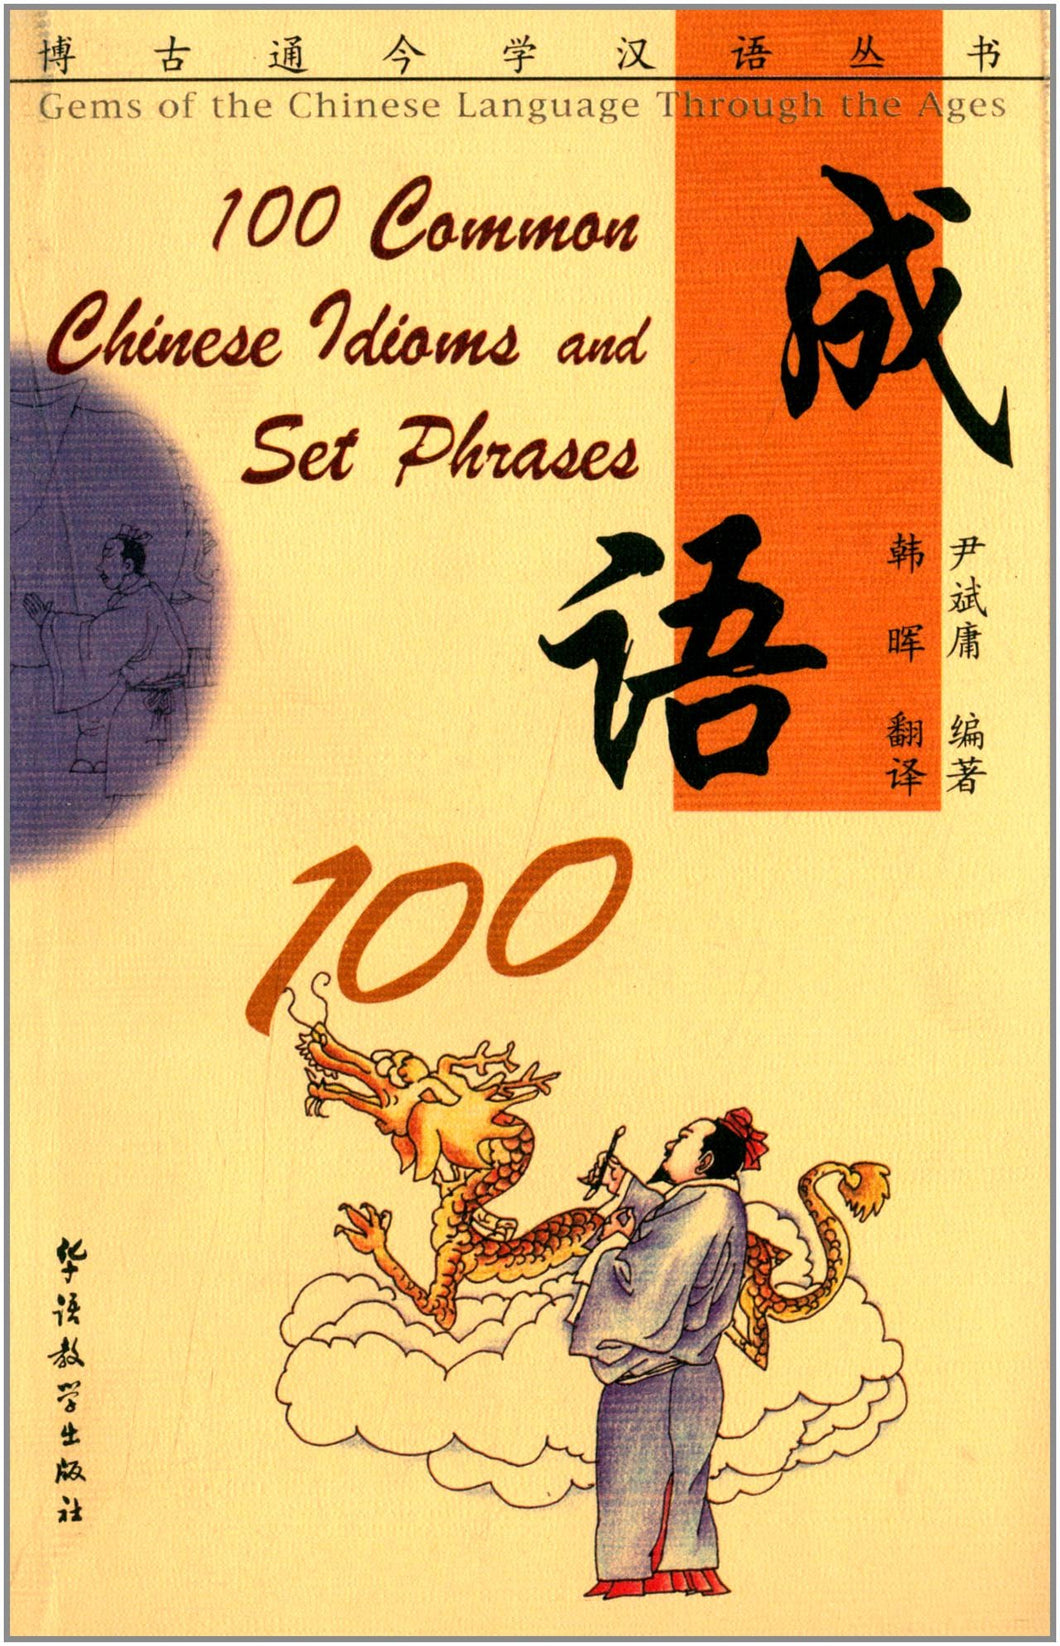 101 Common Chinese Idioms and Set Phrases 成语100(汉英对照)